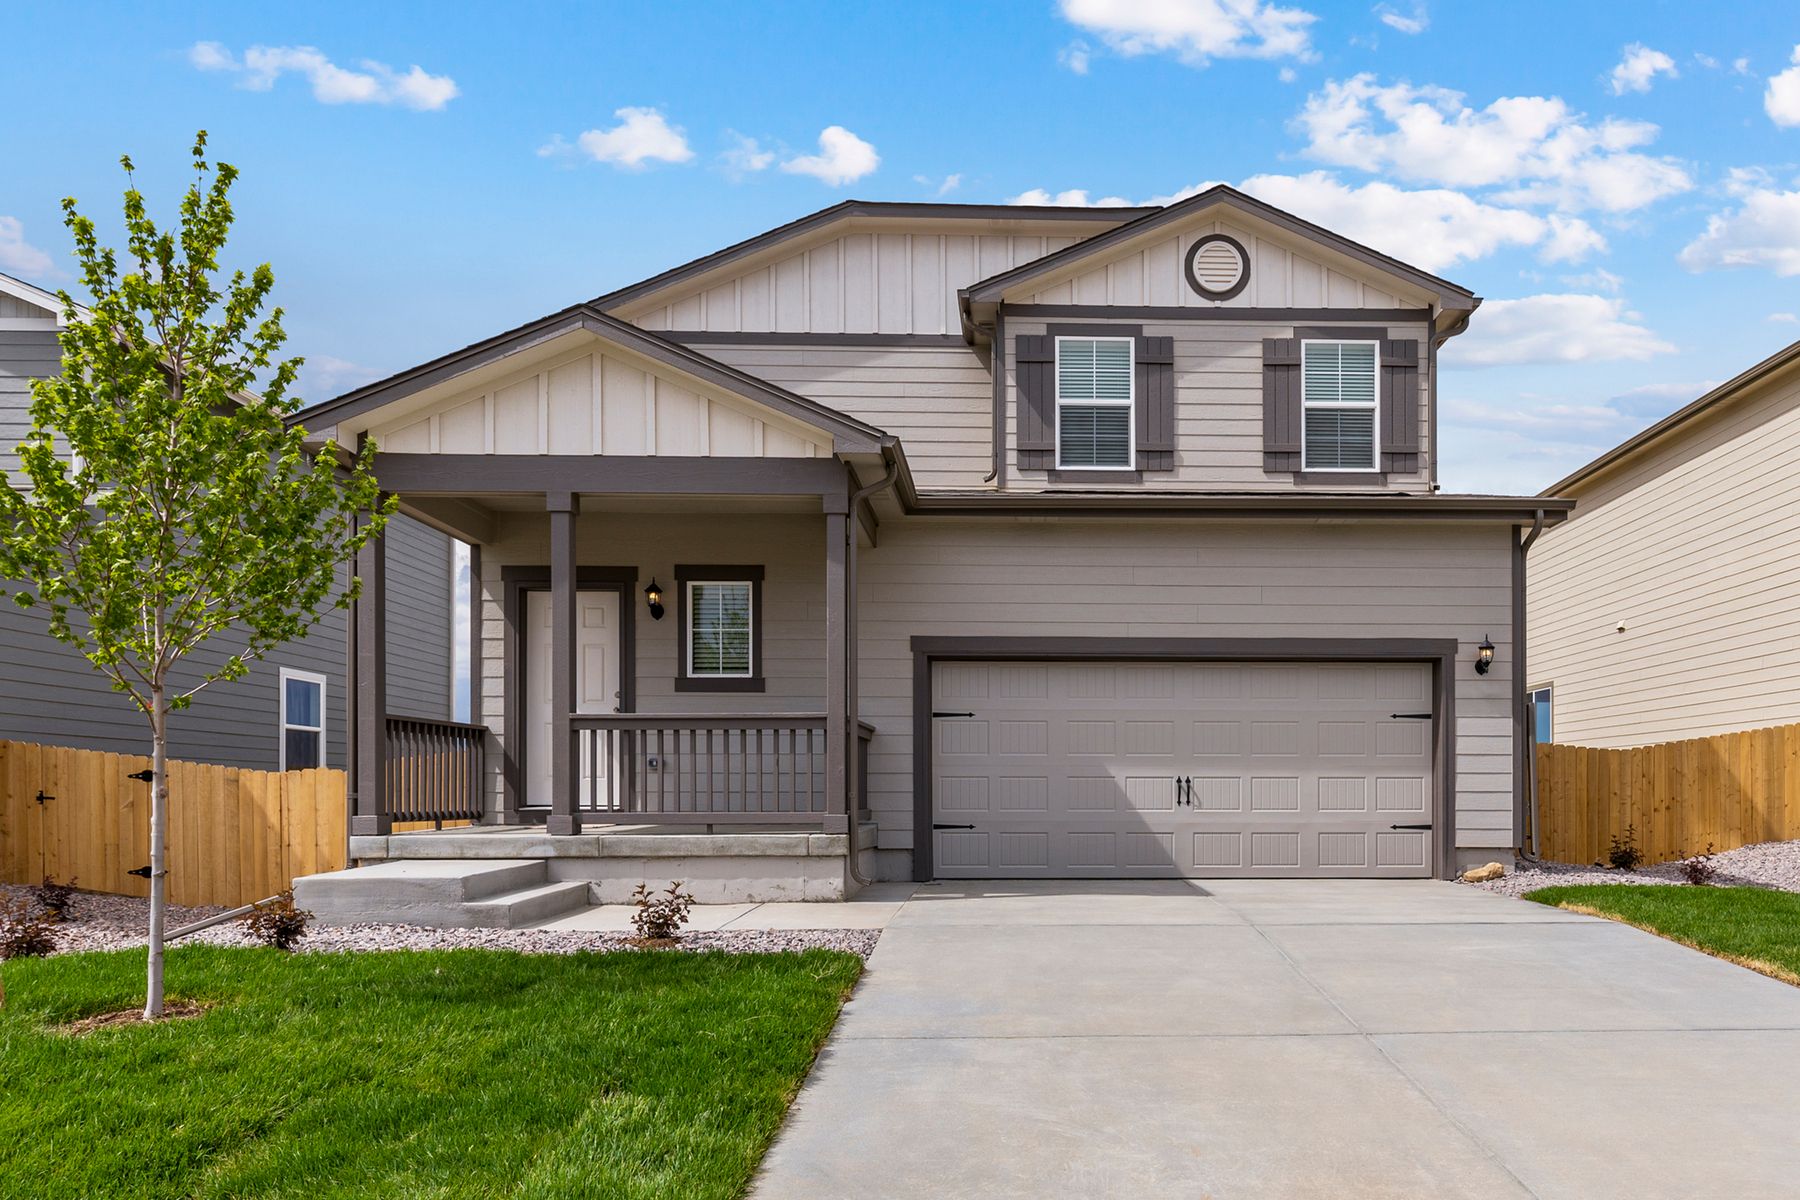 Exterior of the St. Vrain floor plan with a covered front porch and two-car garage.:LGI Homes at Hidden Creek